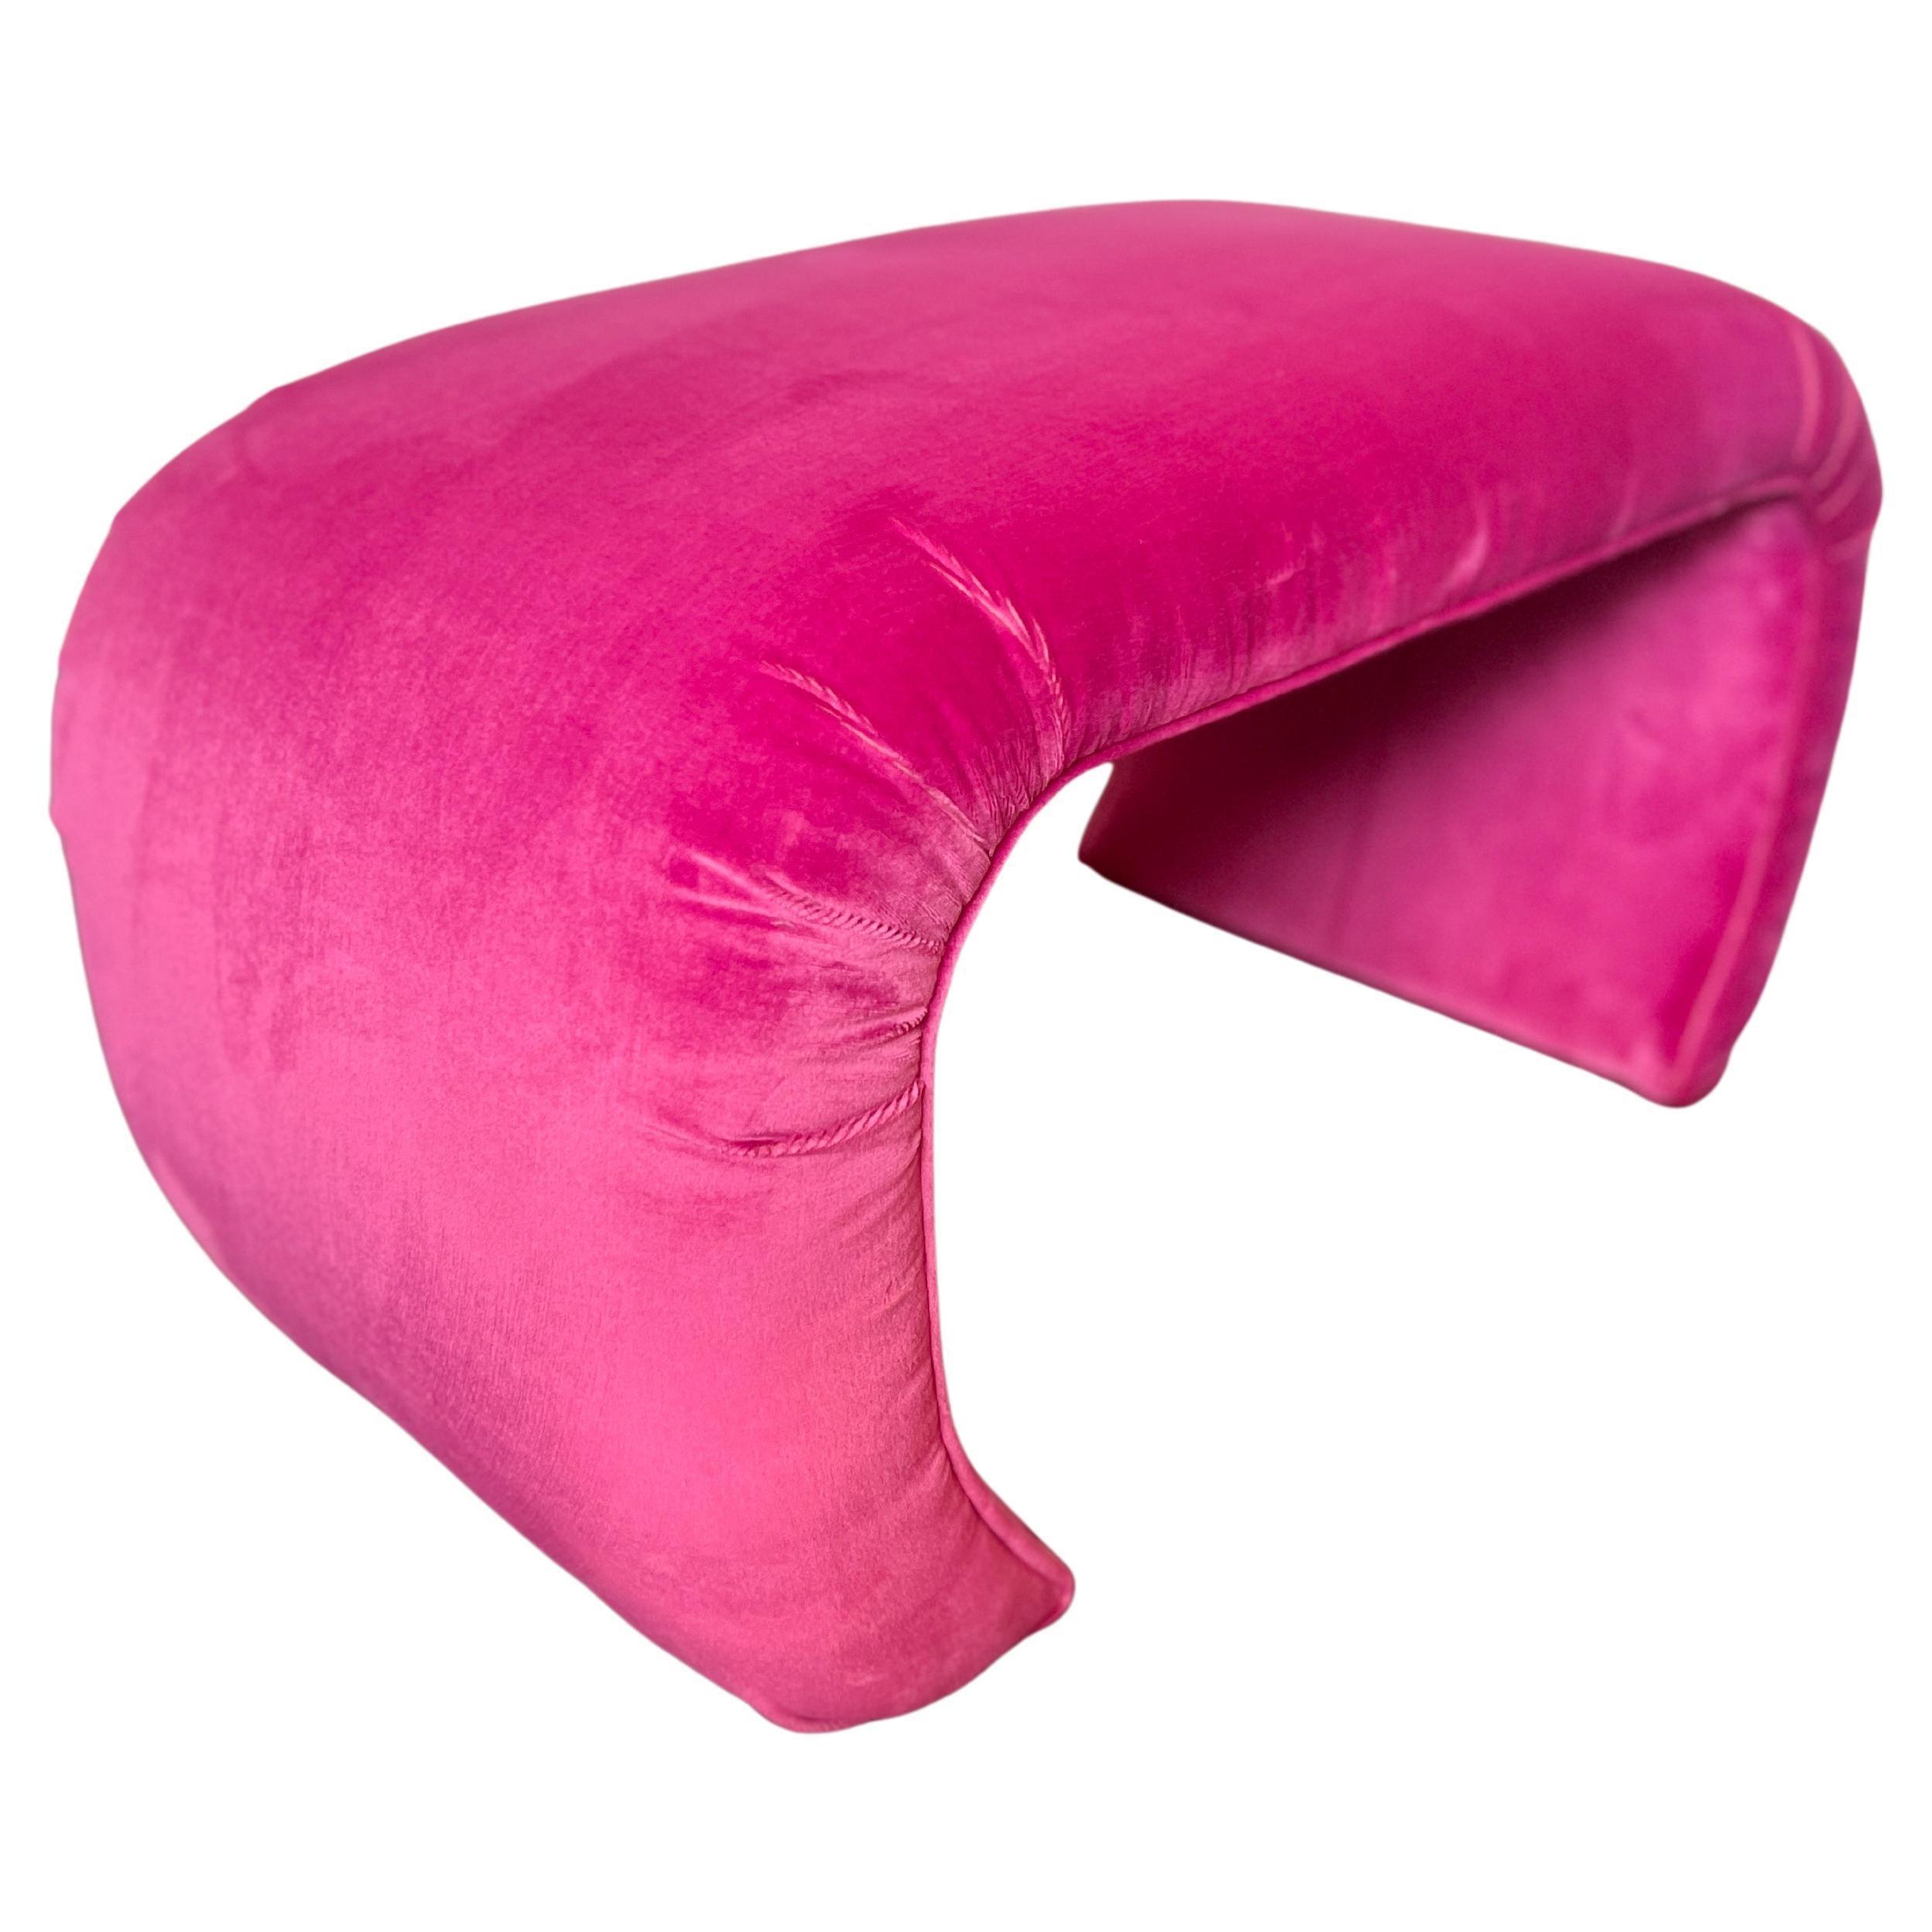 A vintage waterfall ottoman reupholstered in a hot pink performance velvet